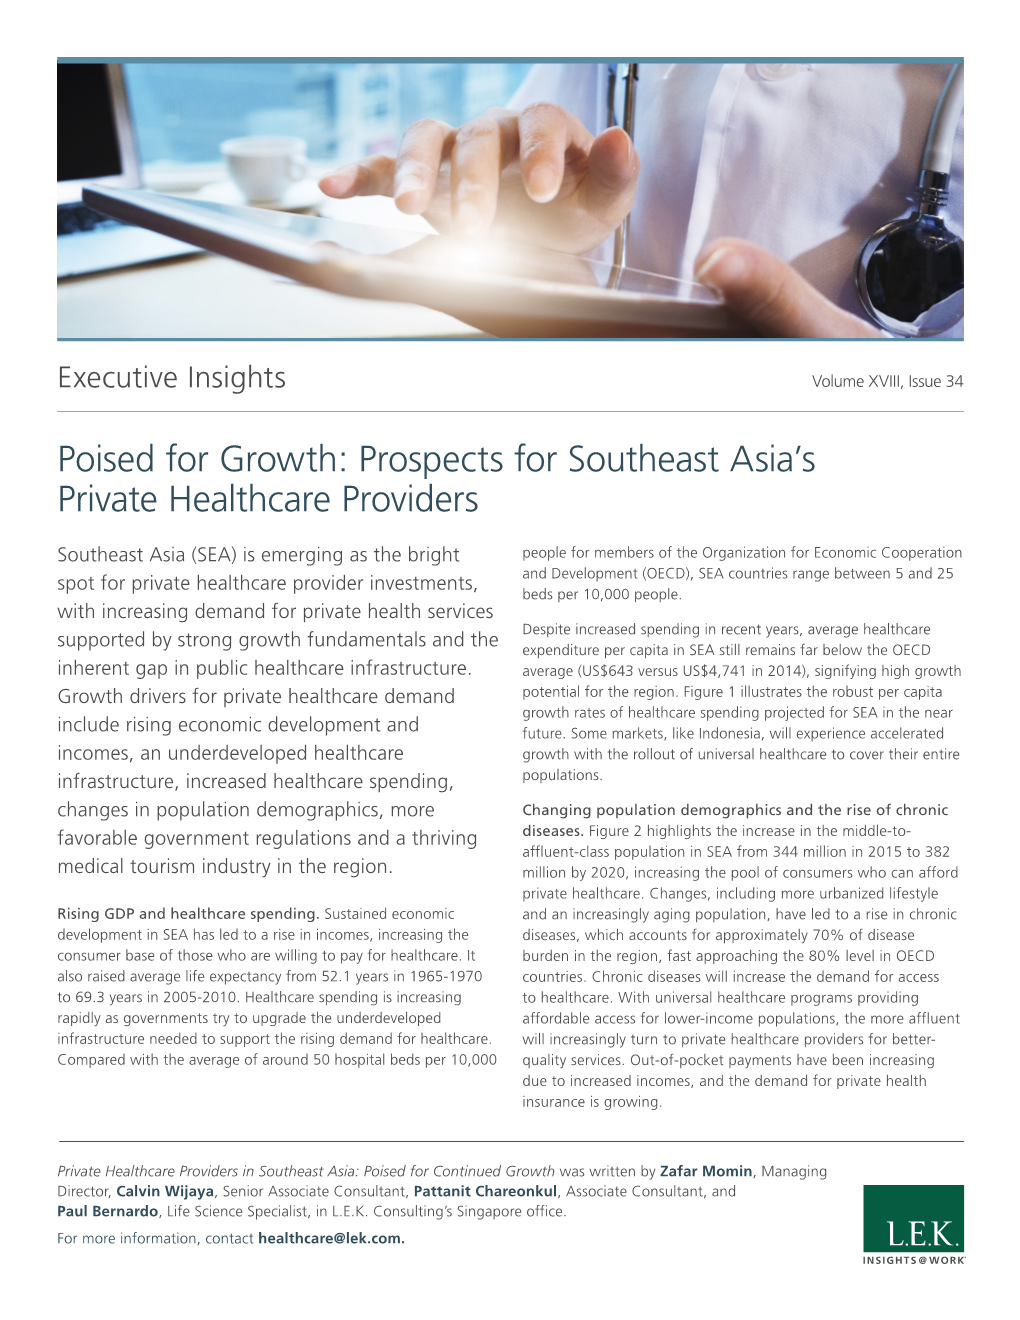 Prospects for Southeast Asia's (SEA) Hospital And